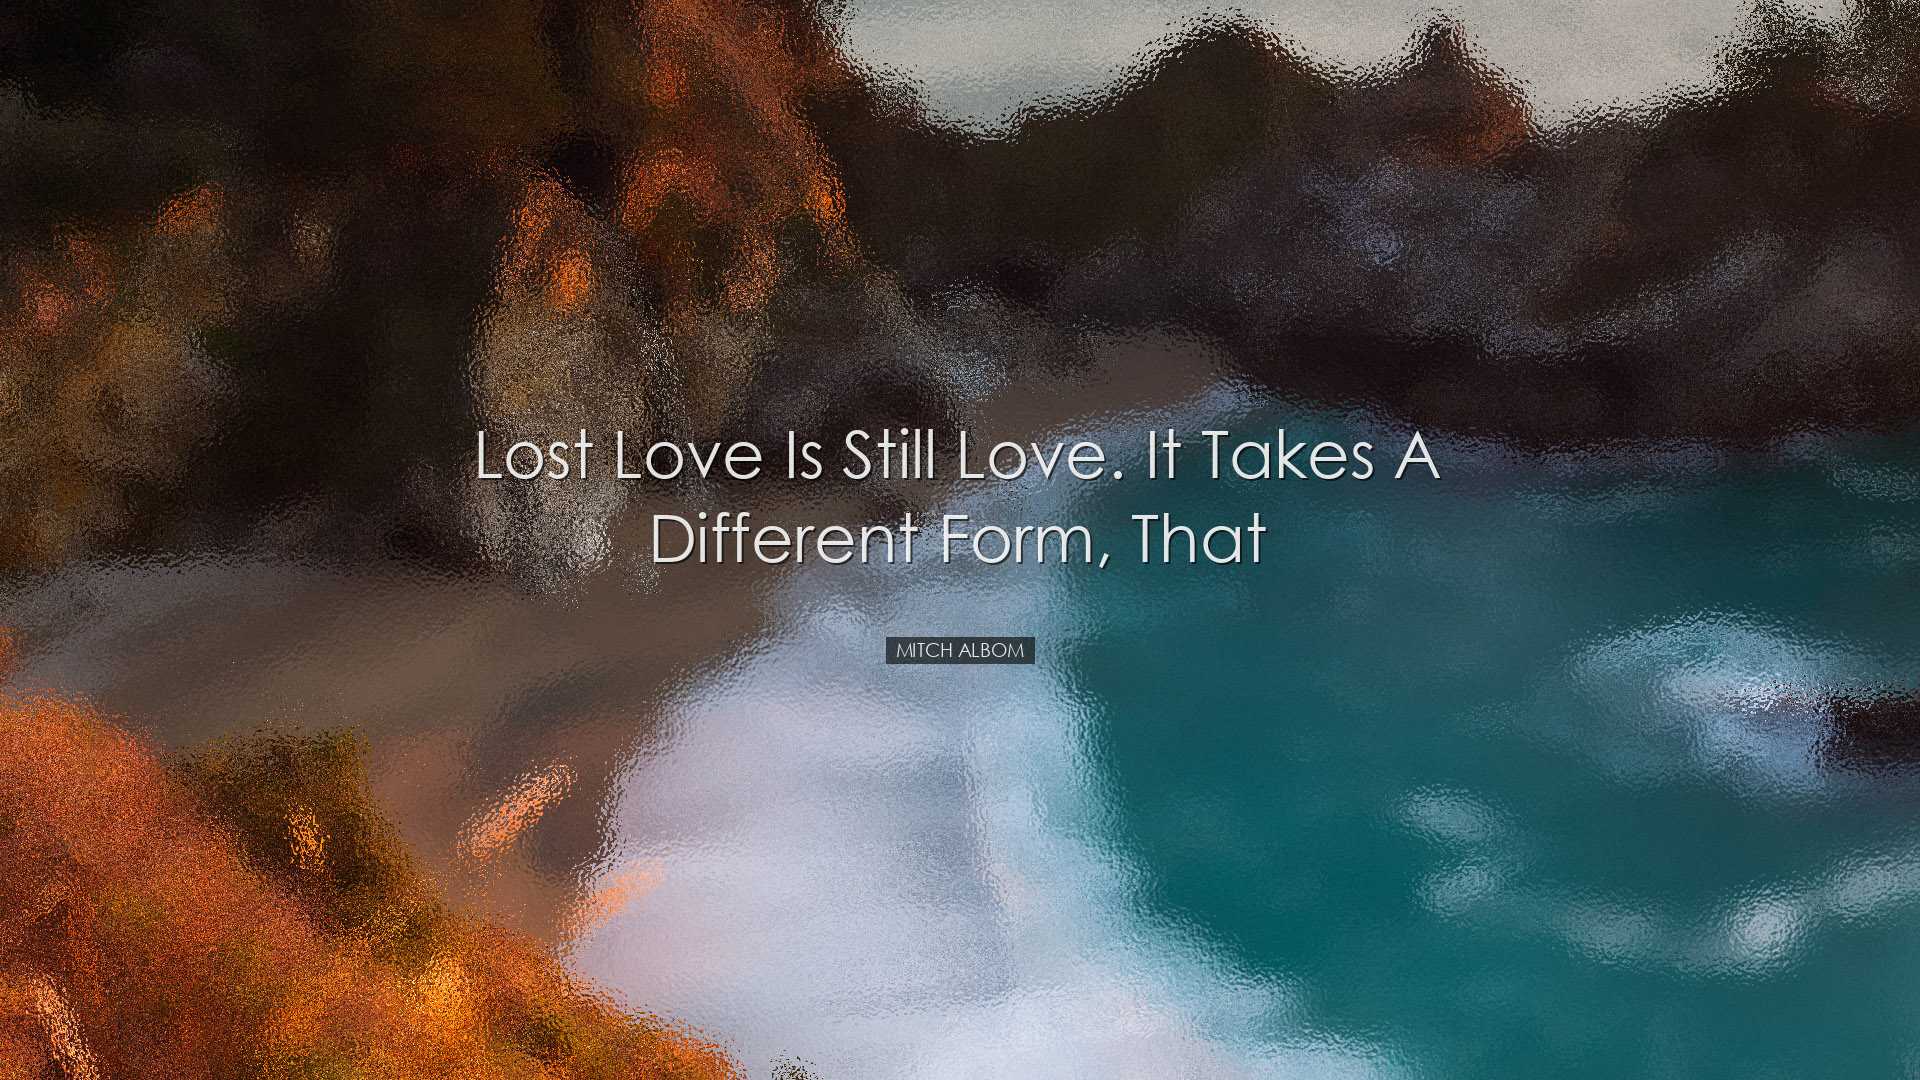 Lost love is still love. It takes a different form, that - Mitch A